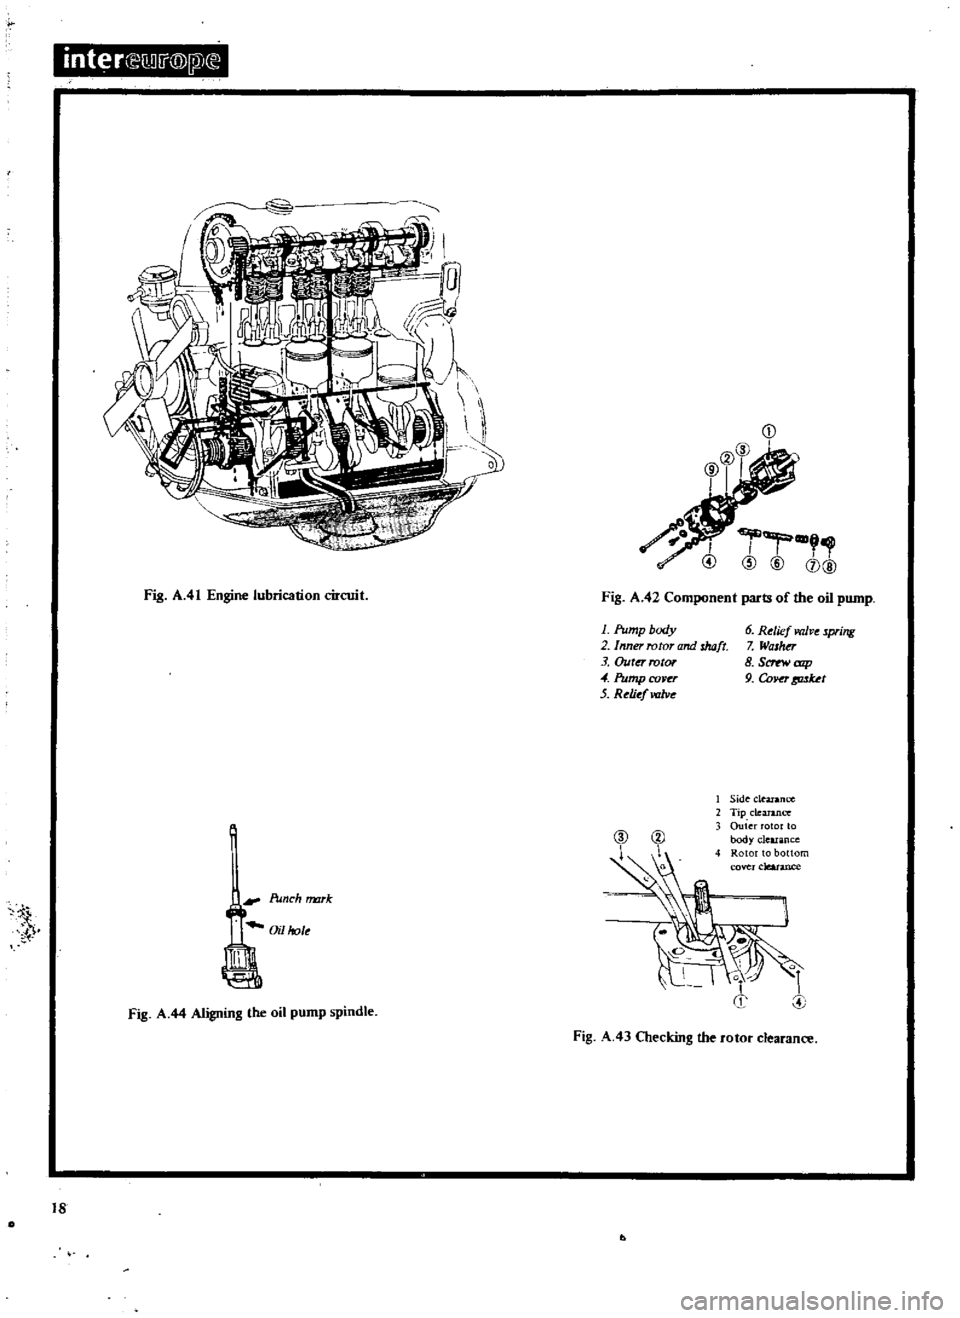 DATSUN 510 1969  Service User Guide 
inter 
lmi

@
jl

Fig 
A
41

Engine 
lubrication 
circuit

i 
Punch 
rmrk

Oil 
hole

L

Fig 
A 
44

Aligning 
the 
oil

pump 
spindle

18 
II

l

o 
CD

I

Fig 
A
42

Component 
parts 
of 
the 
oil
